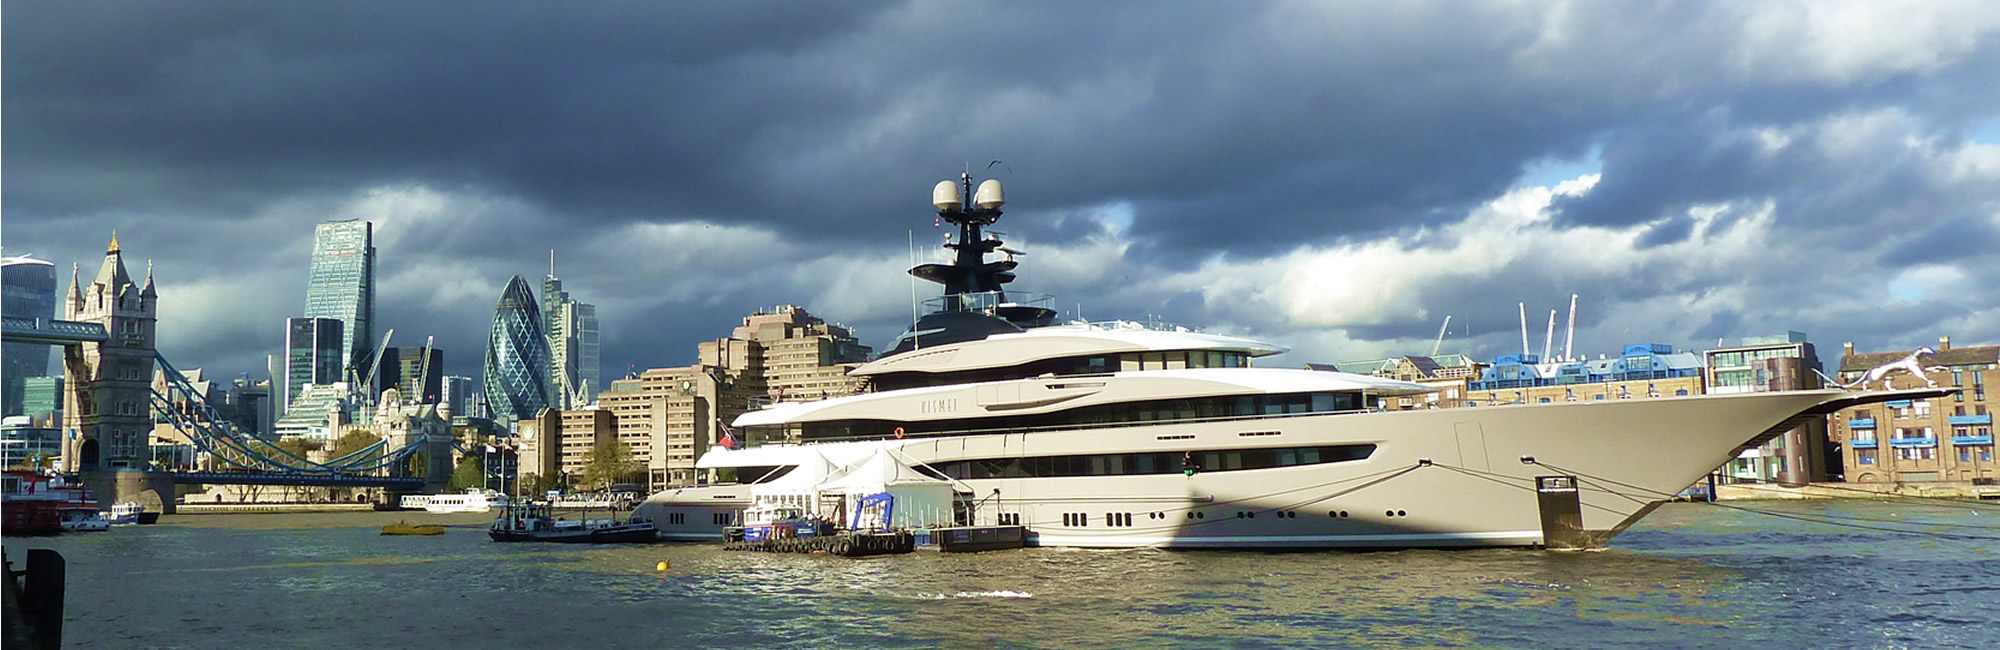 super yacht on the thames